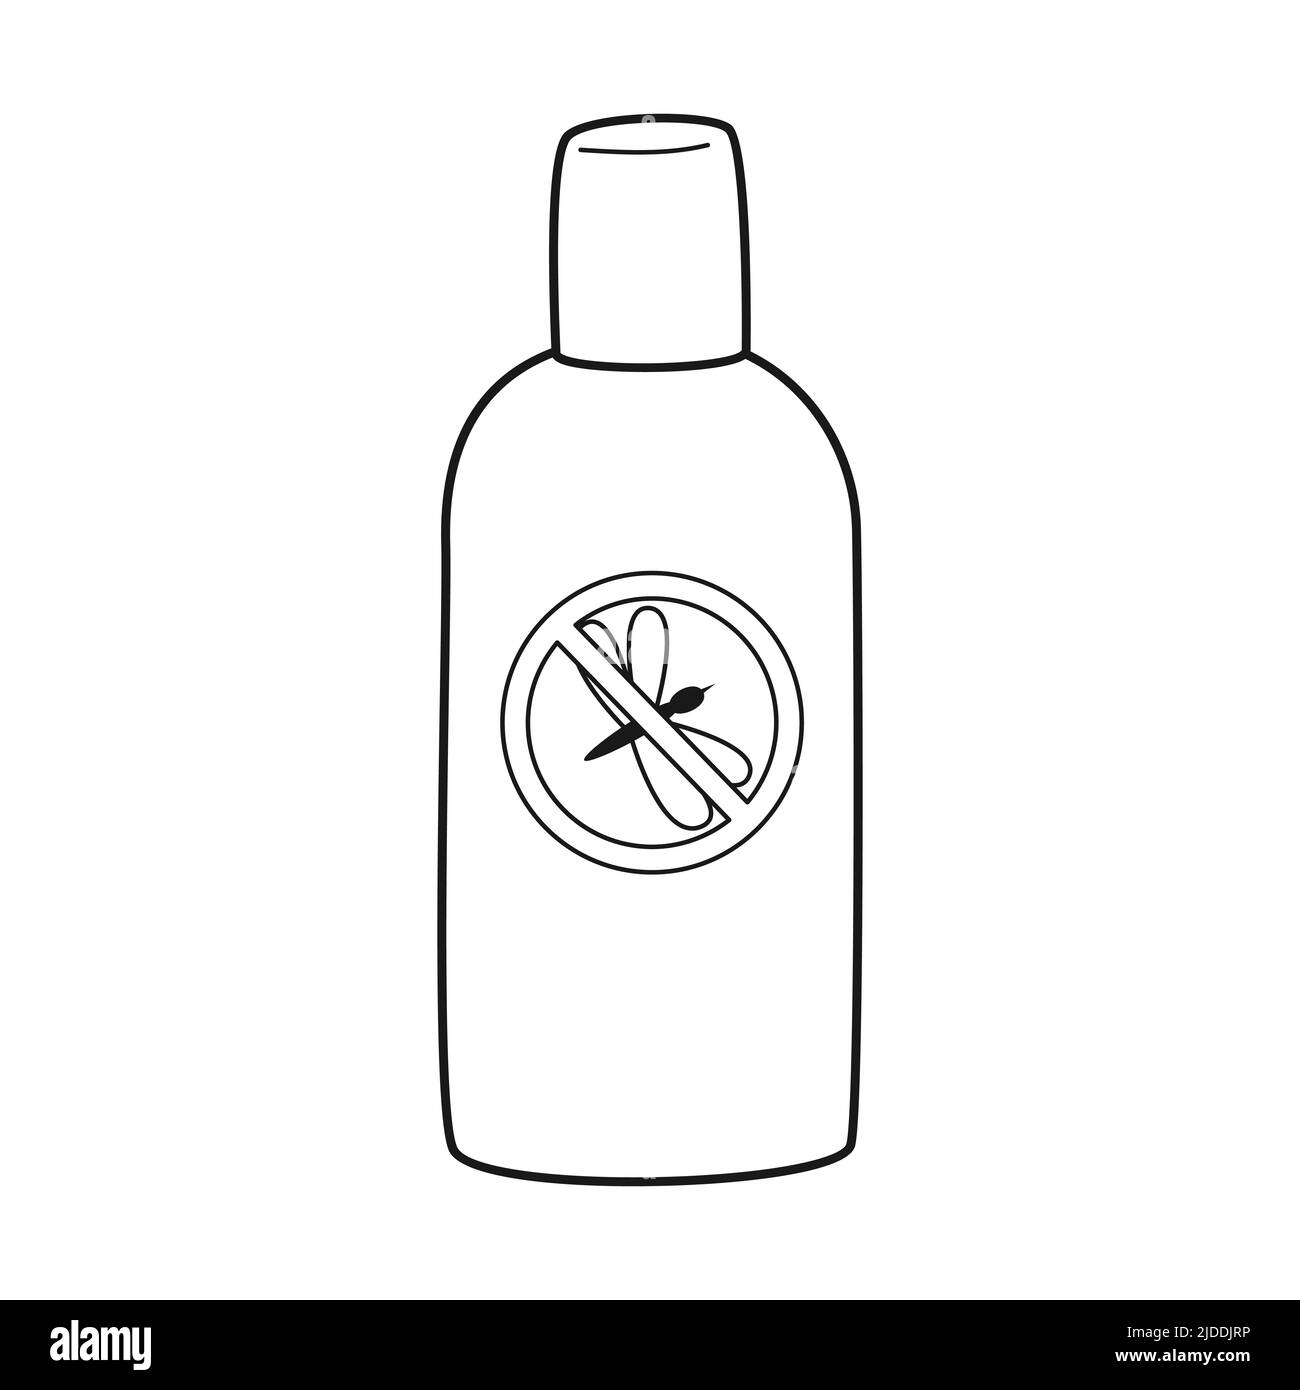 Doodle Mosquito repellent. Pocket spray with a mosquito blocked by a forbidding sign. Insecticide for camping, hiking, traveling. Outline black white Stock Vector